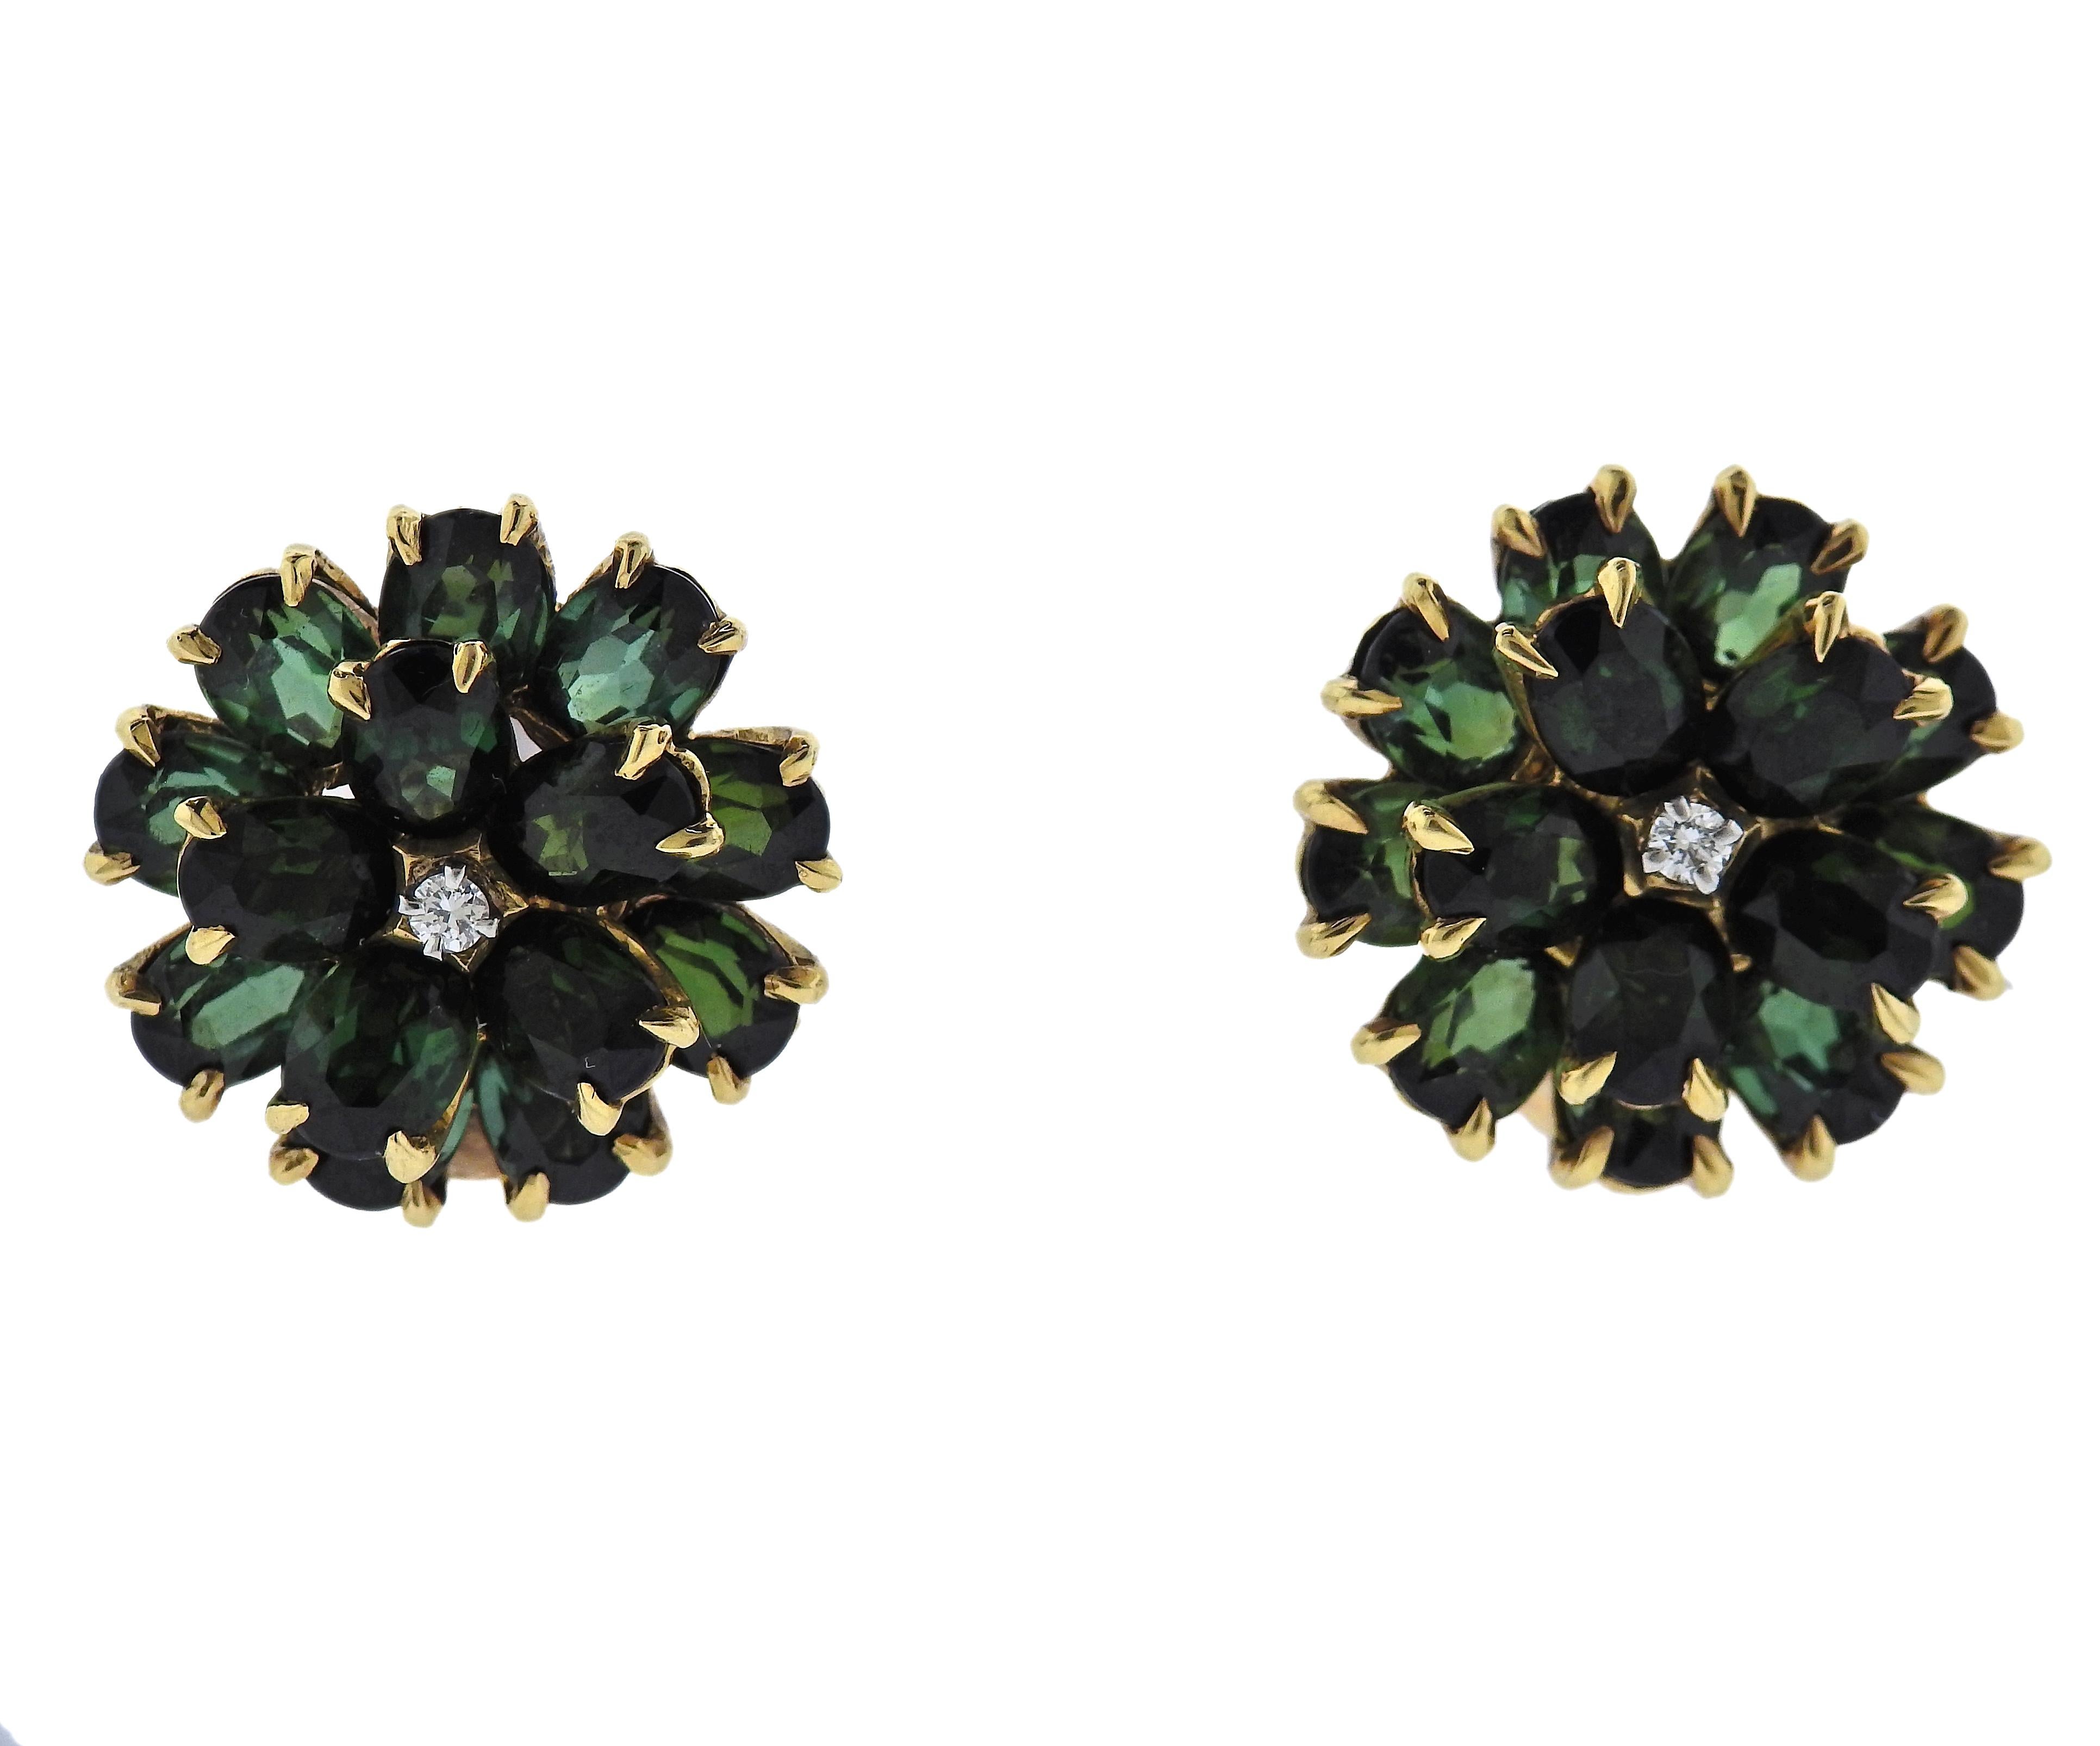 Retro 14k gold flower earrings by Tiffany & Co, with green tourmalines and approx. 0.06ctw G/VS diamonds in the center. Earrings are 20mm in diameter. Marked: Tiffany & Co, 14kt, T.2423905. Weight - 18.2 grams.